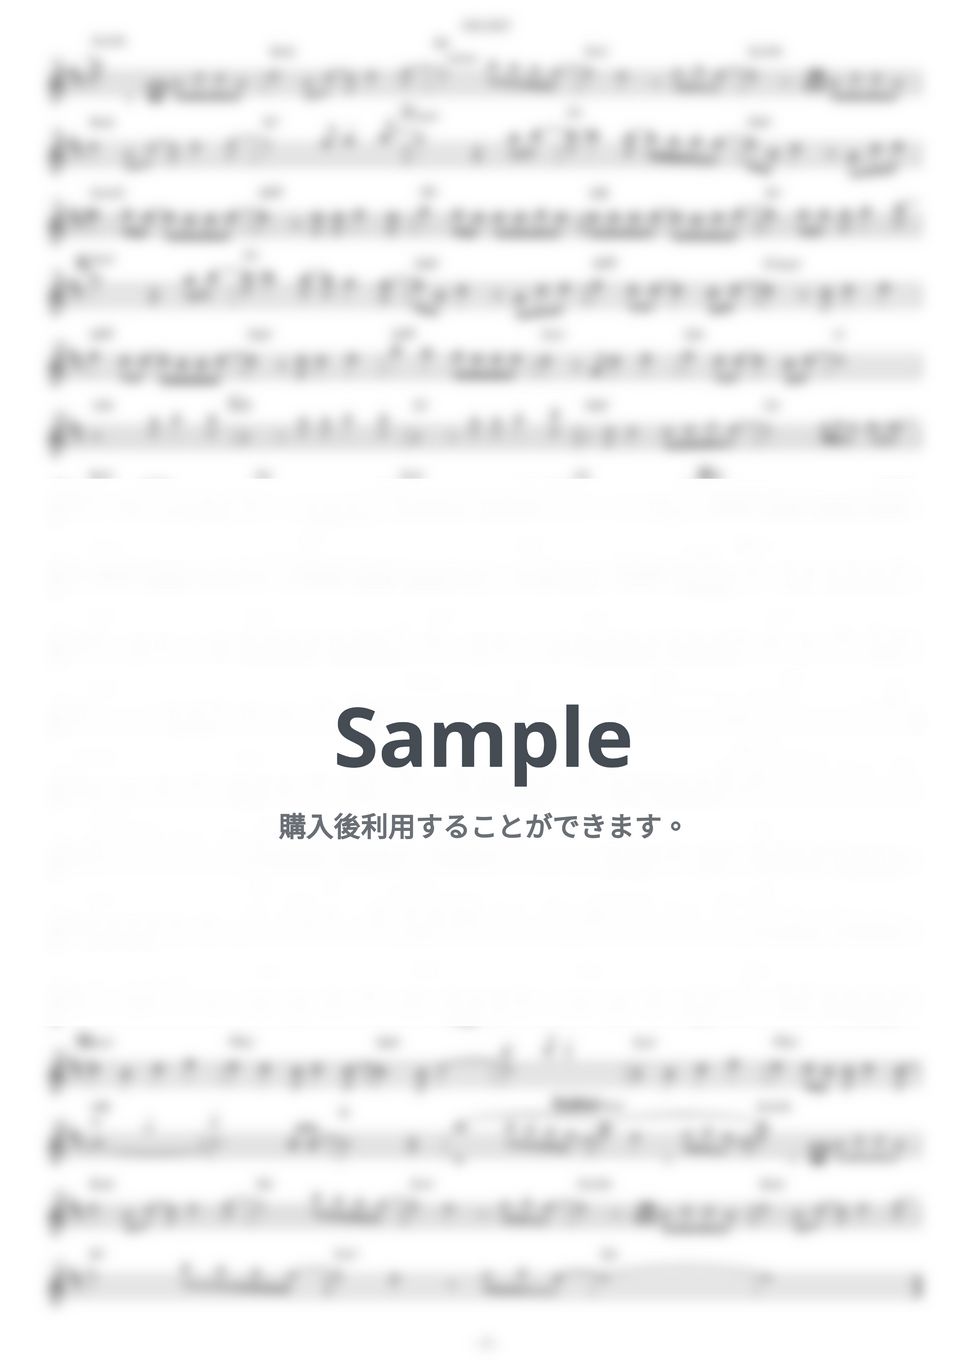 Official髭男dism - SOULSOUP (『劇場版 SPY×FAMILY CODE: White』 / in C) by muta-sax